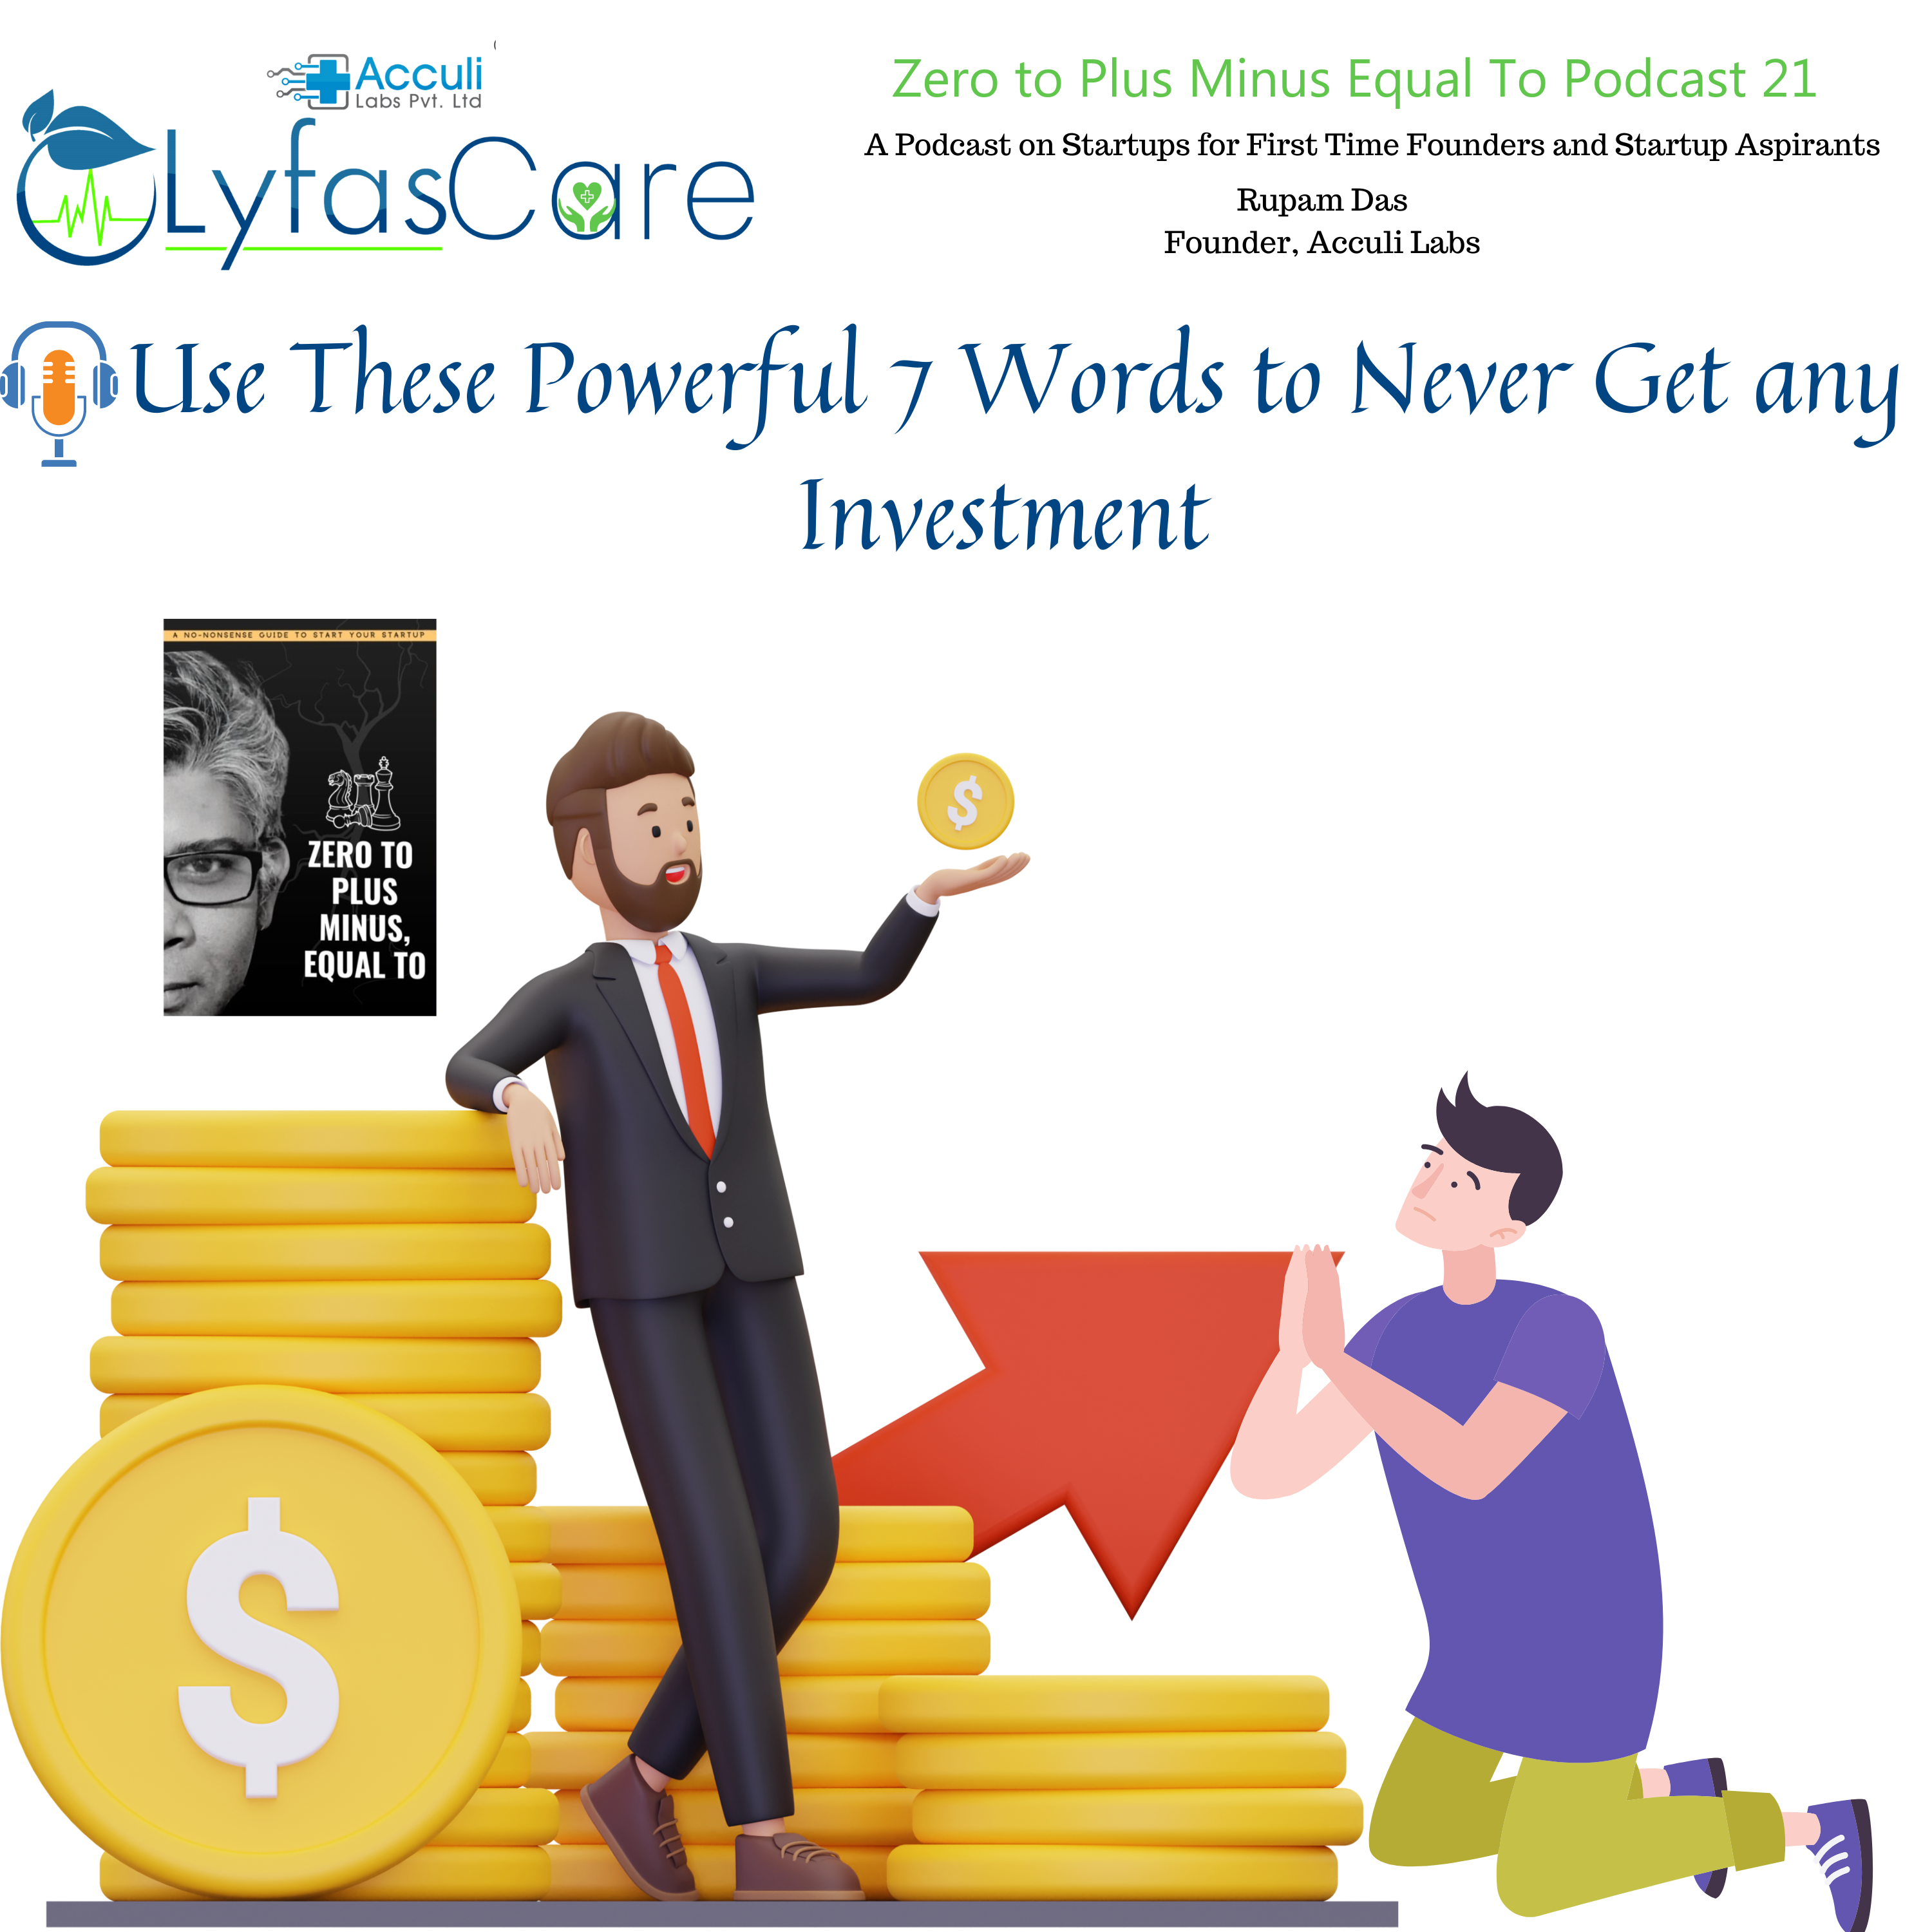 Use These Powerful 7 Words to Never Get any Investment | Zero to Plus Minus Equal to Episode 21